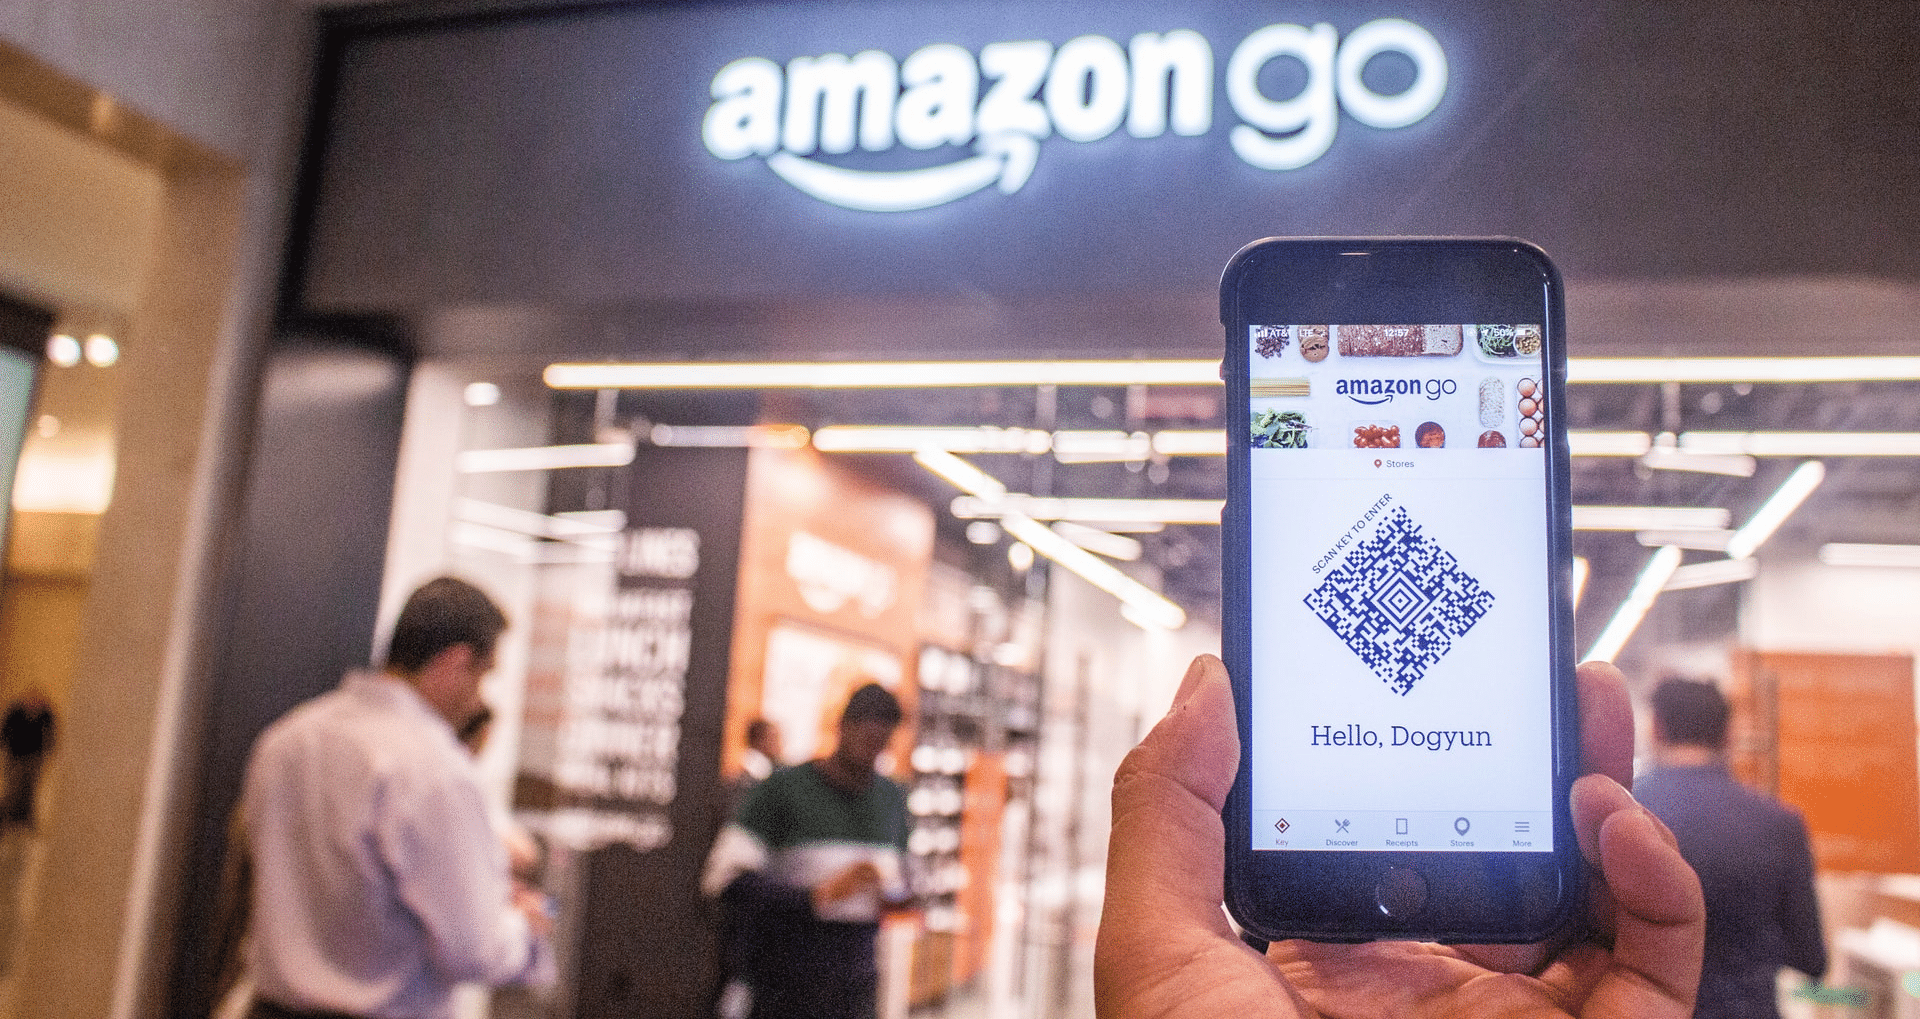 Amazon Go's program is a good example of a mobile first approach to loyalty.